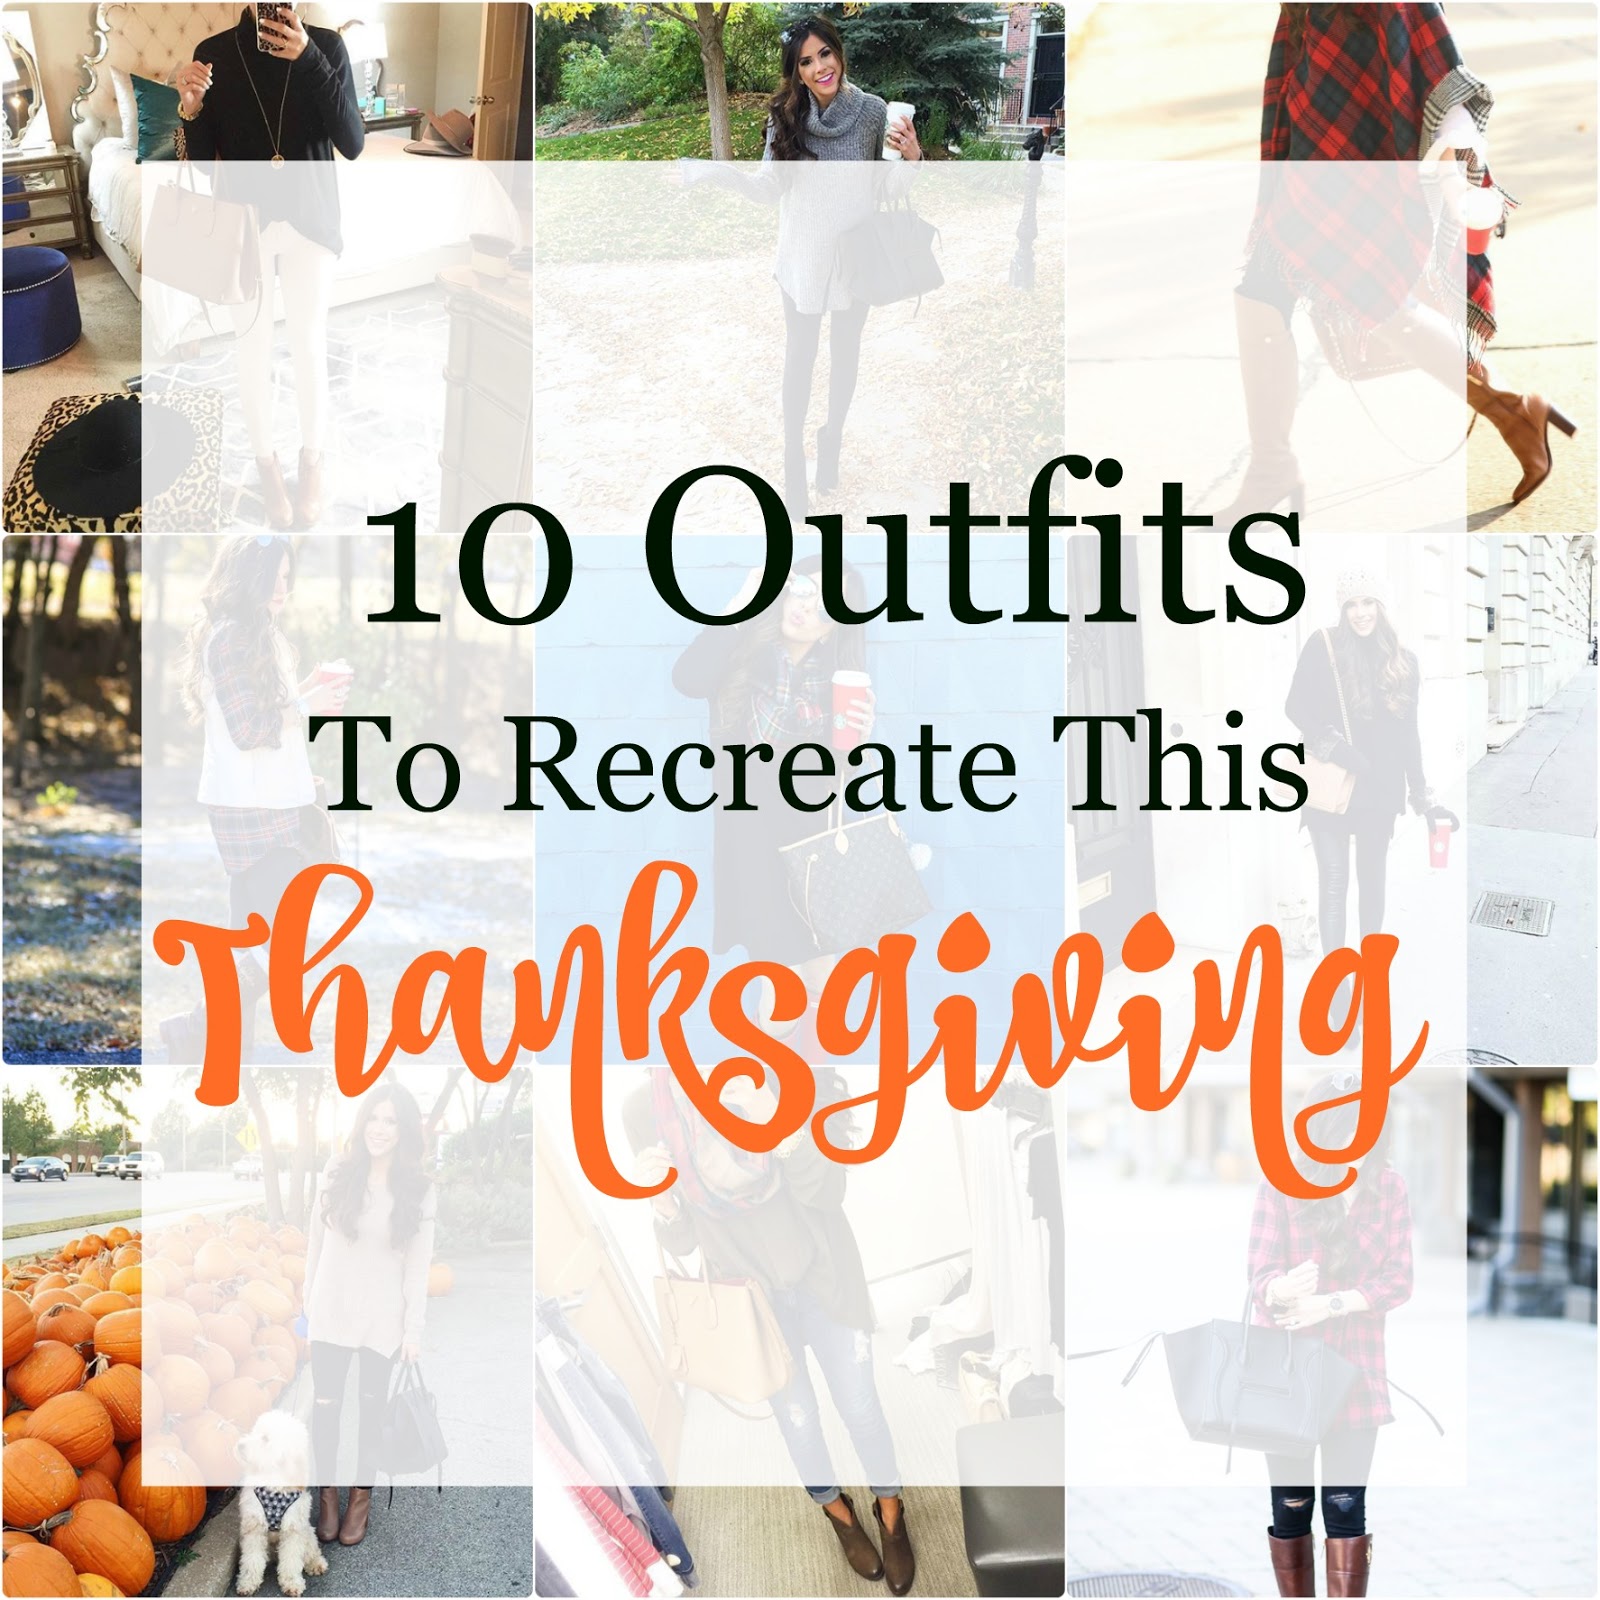 10 Outfits to Re-Create This Thanksgiving | The Sweetest Thing | Bloglovin’